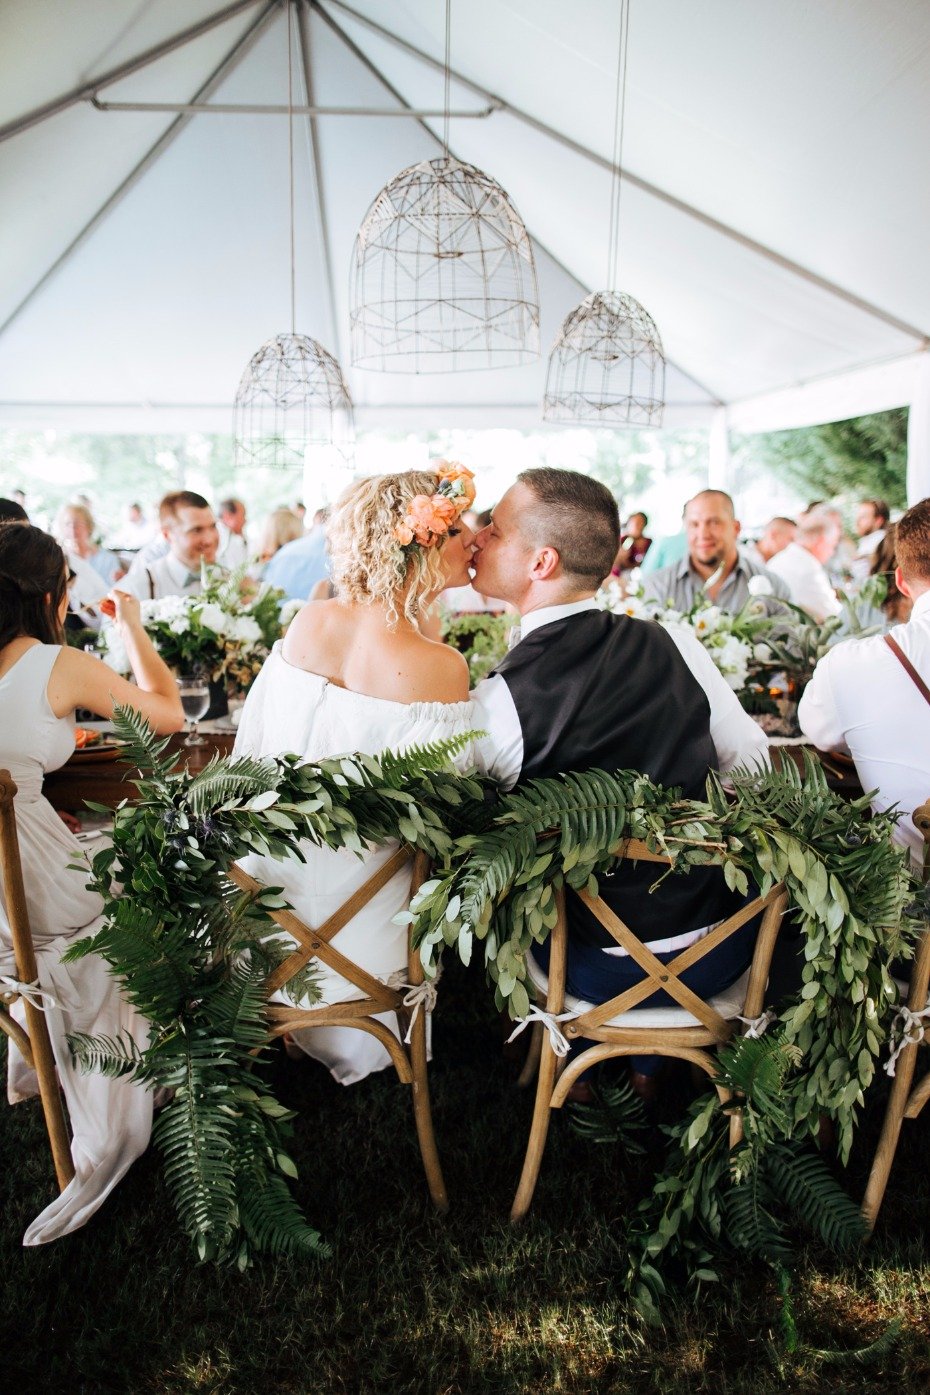 Love this plant filled wedding